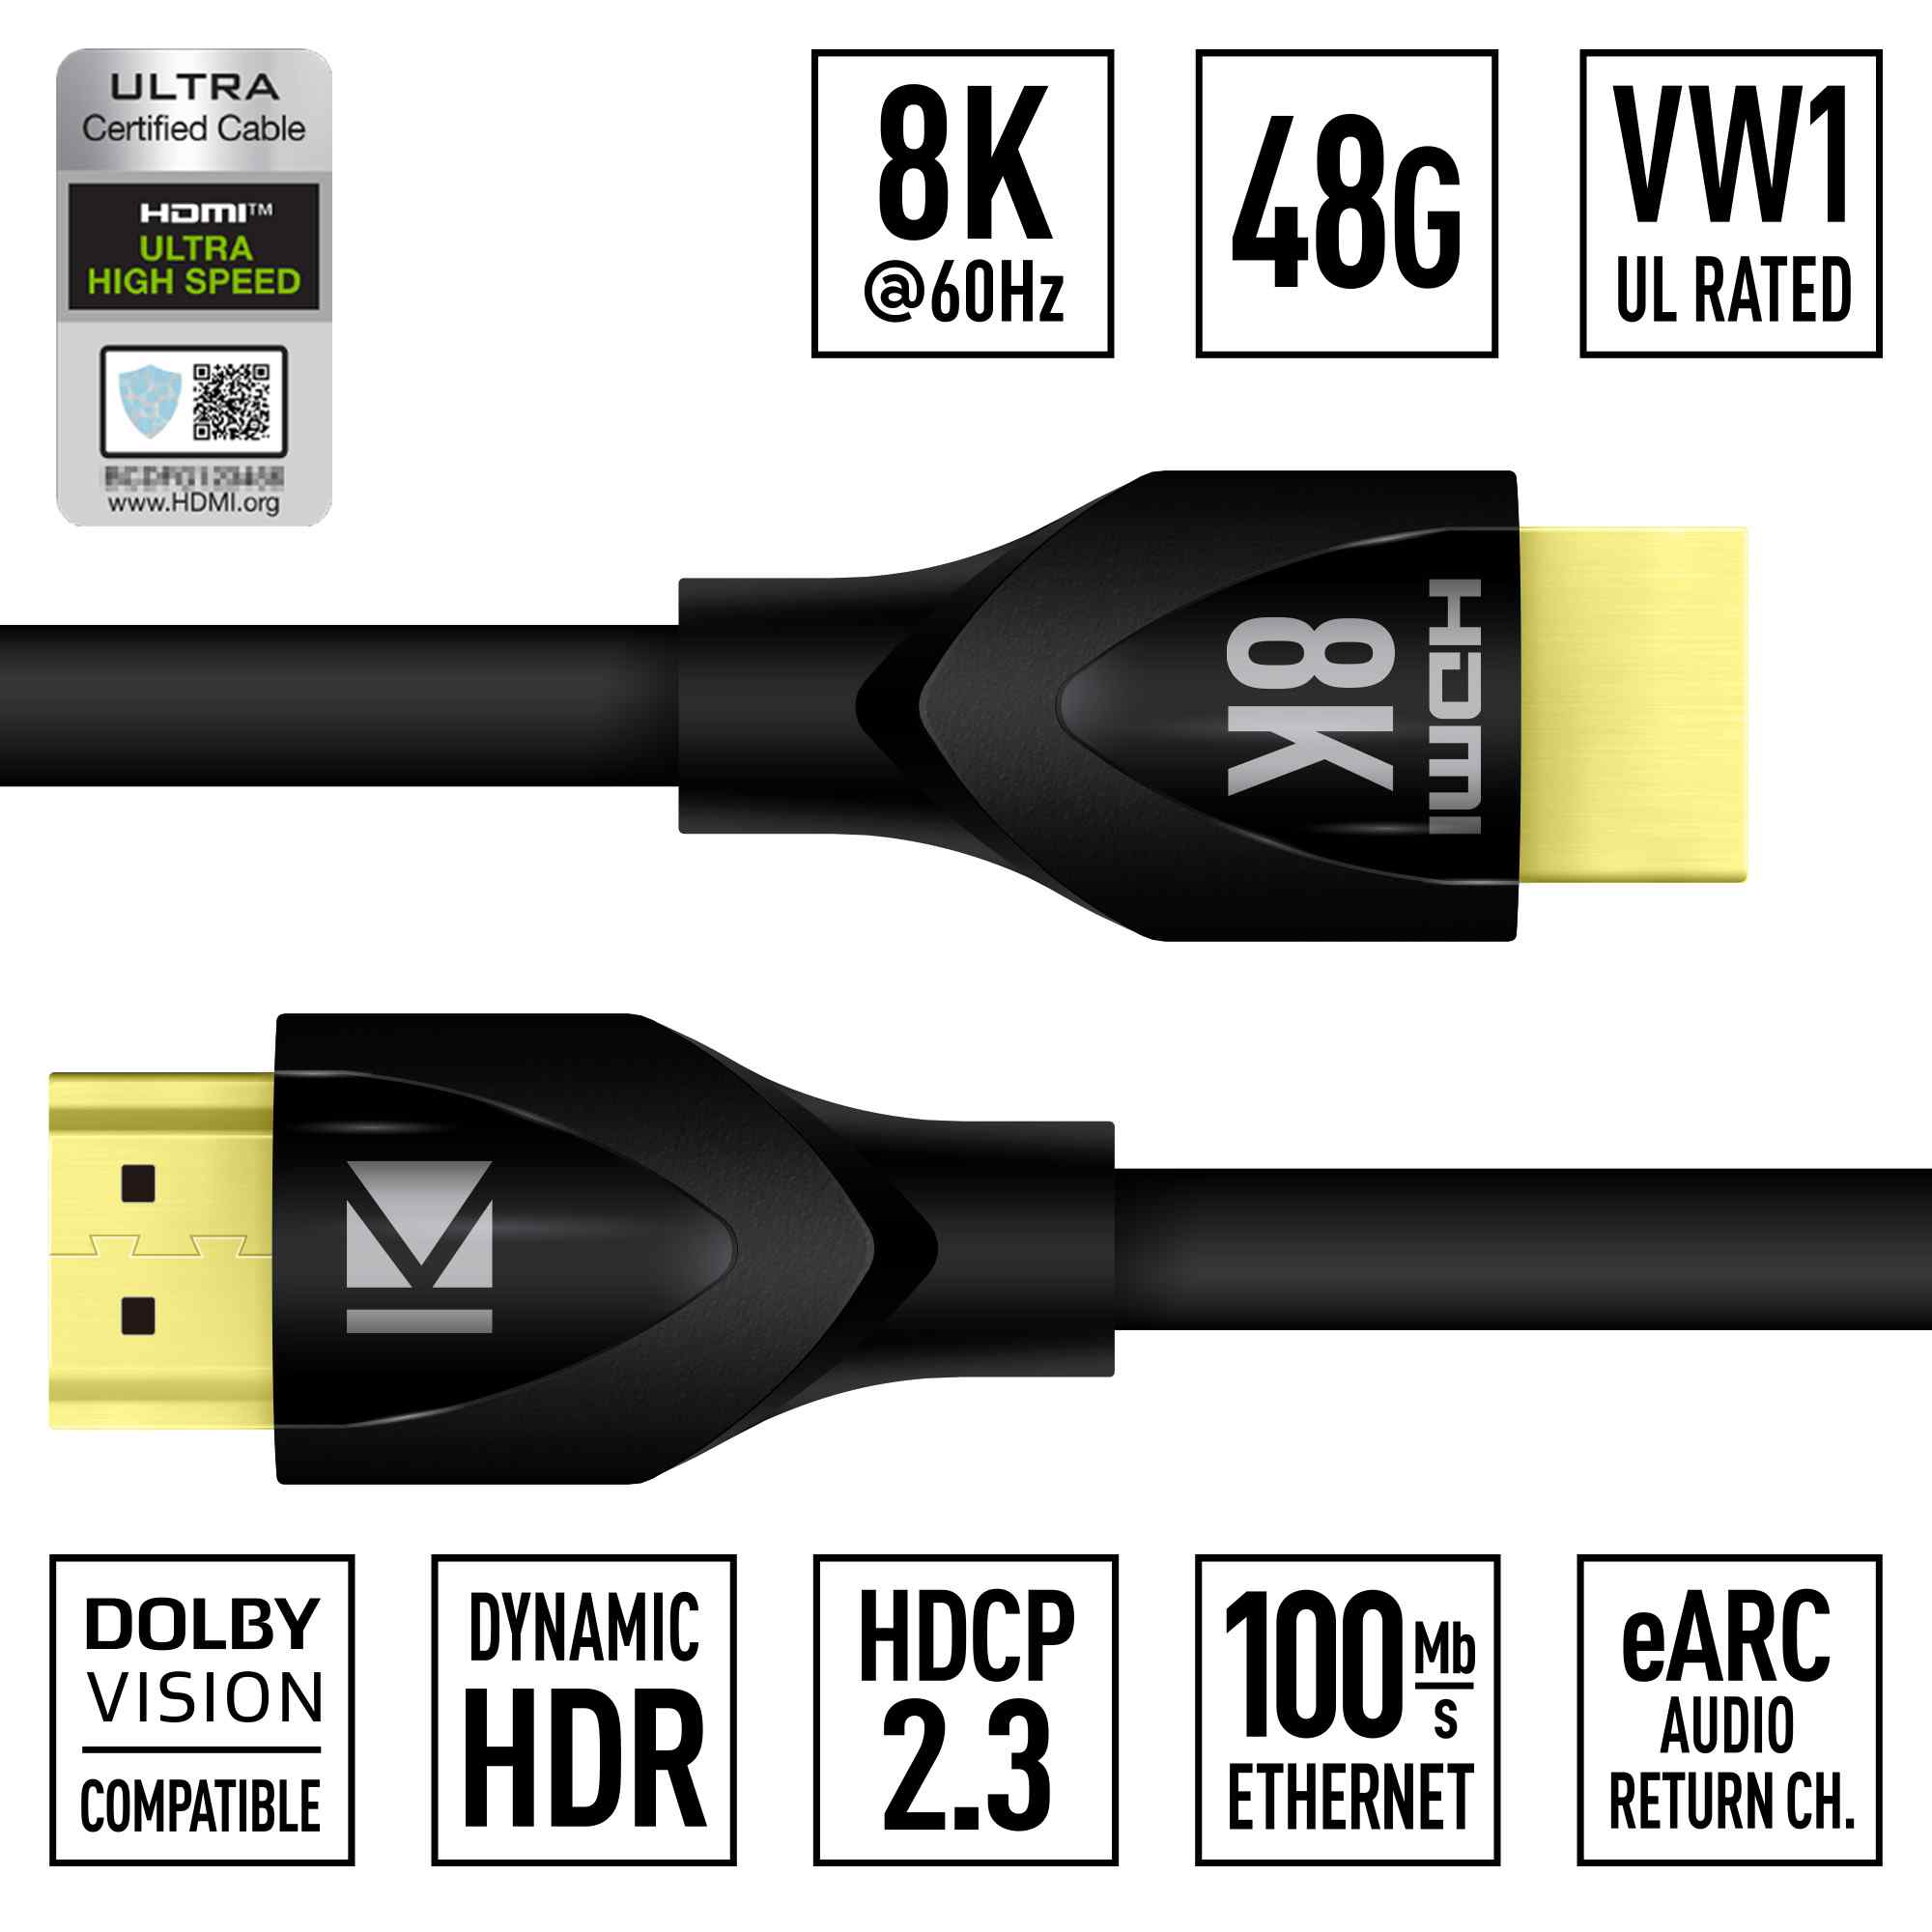 Key Digital high speed hdmi cable Product Image